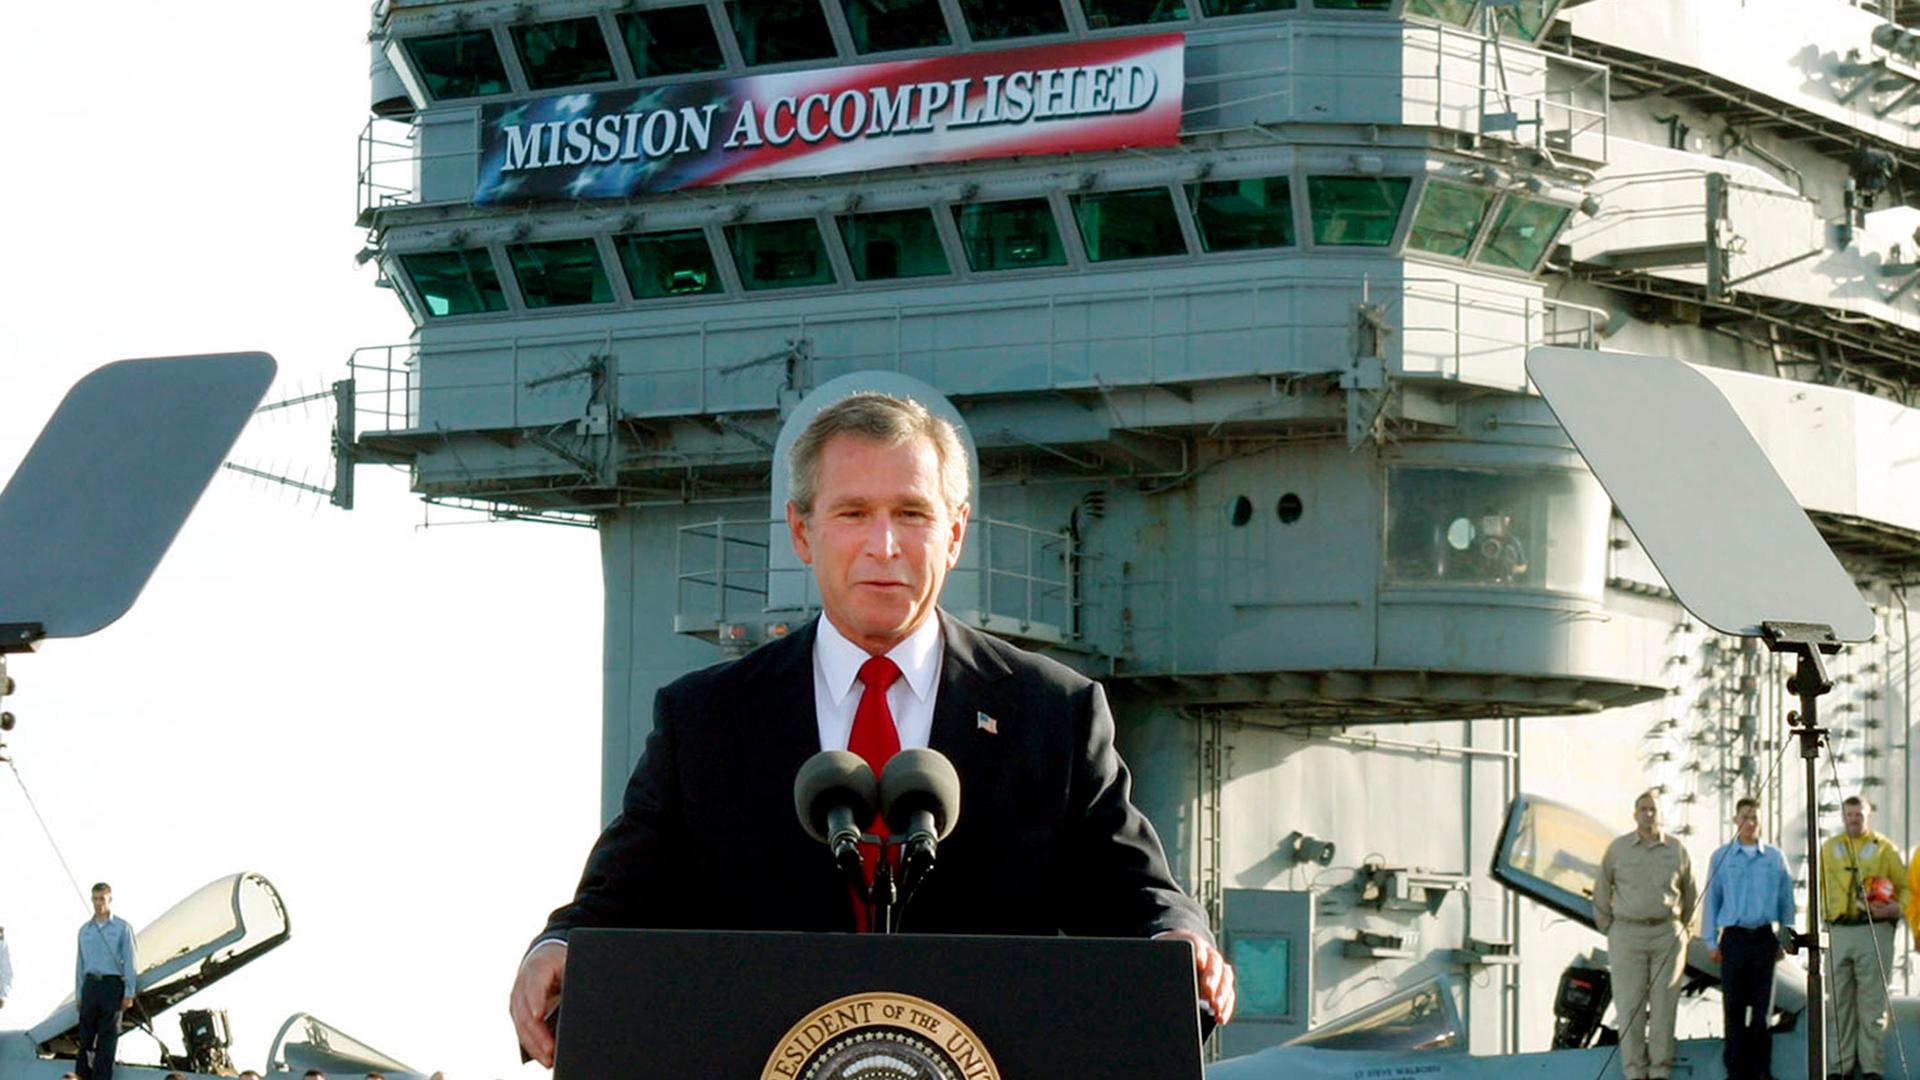 President George W. Bush declares the end of major combat in Iraq as he speaks aboard the aircraft carrier USS Abraham Lincoln off the California coast. But the war dragged on for many years after that.